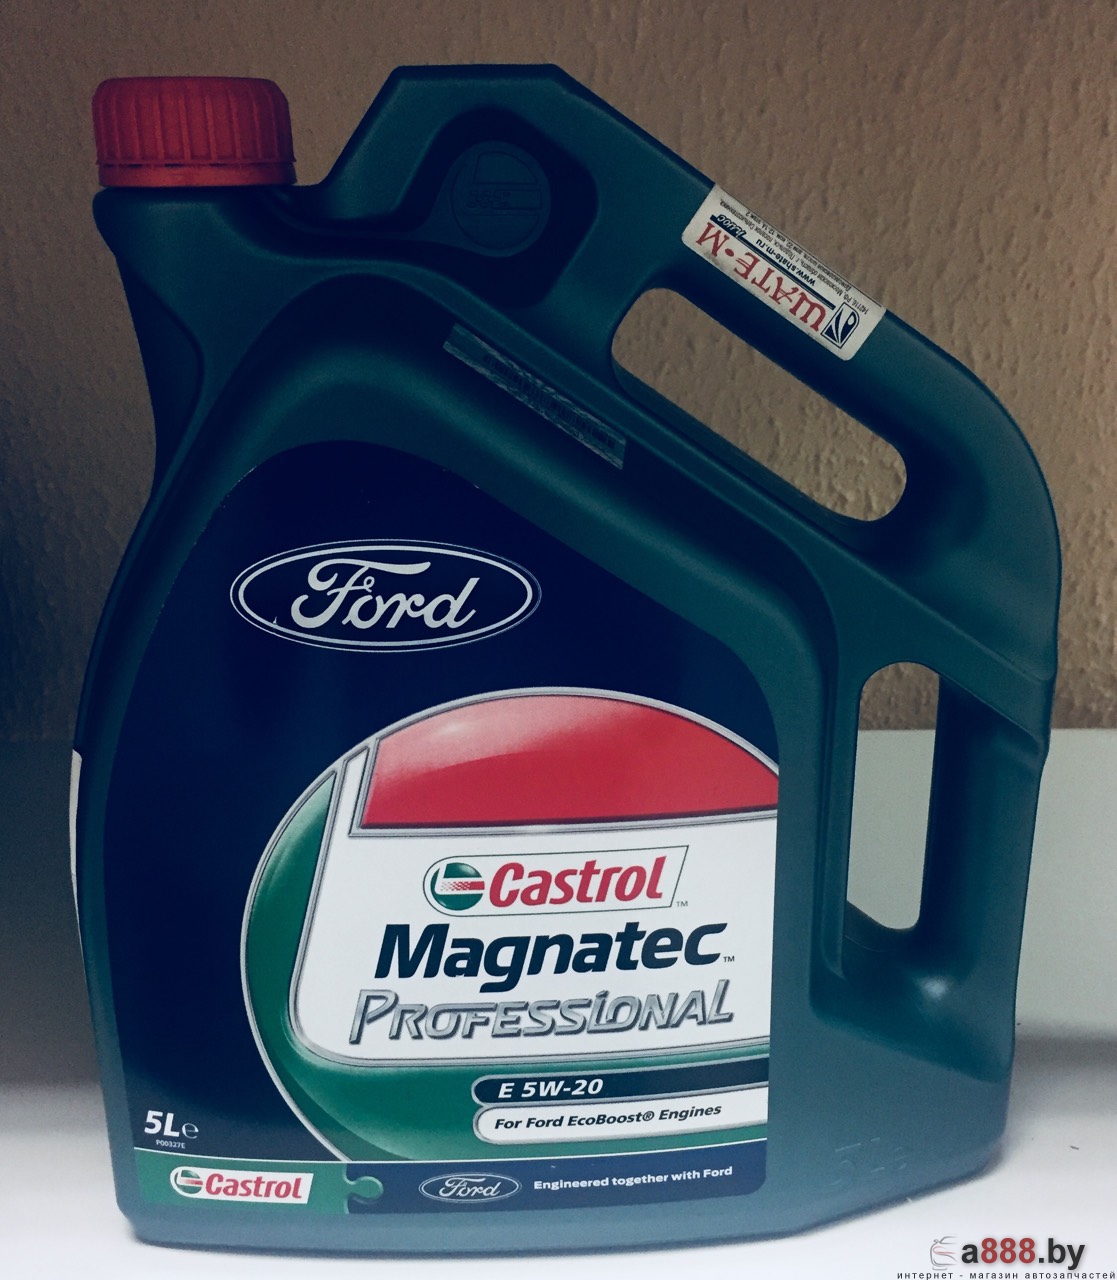 Масло ford ecoboost. Ford Magnatec 5w-20 5л.. Castrol 5w20 Ford. Castrol Magnatec professional 5w20 Ford. Масло Ford Castrol Magnatec e 5w20.